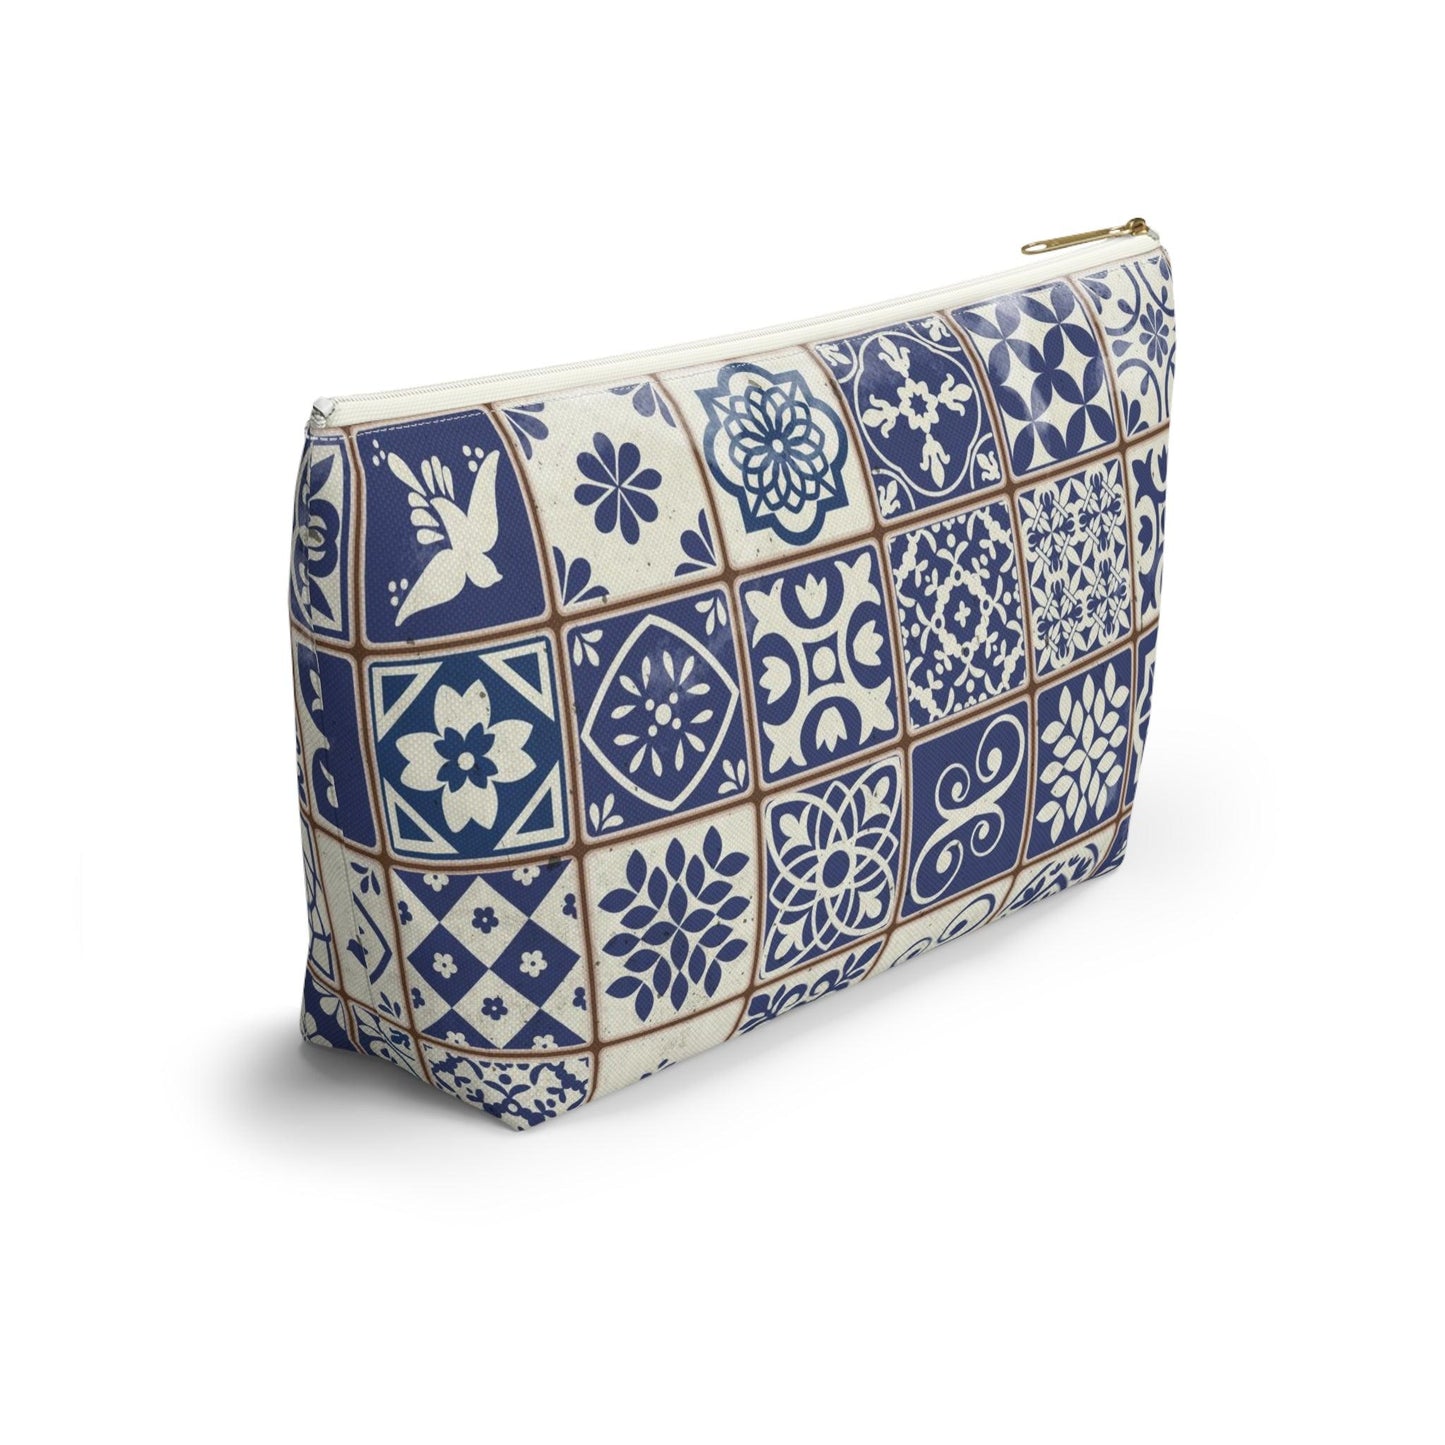 Portuguese Tile Pouch – The Global Wanderer